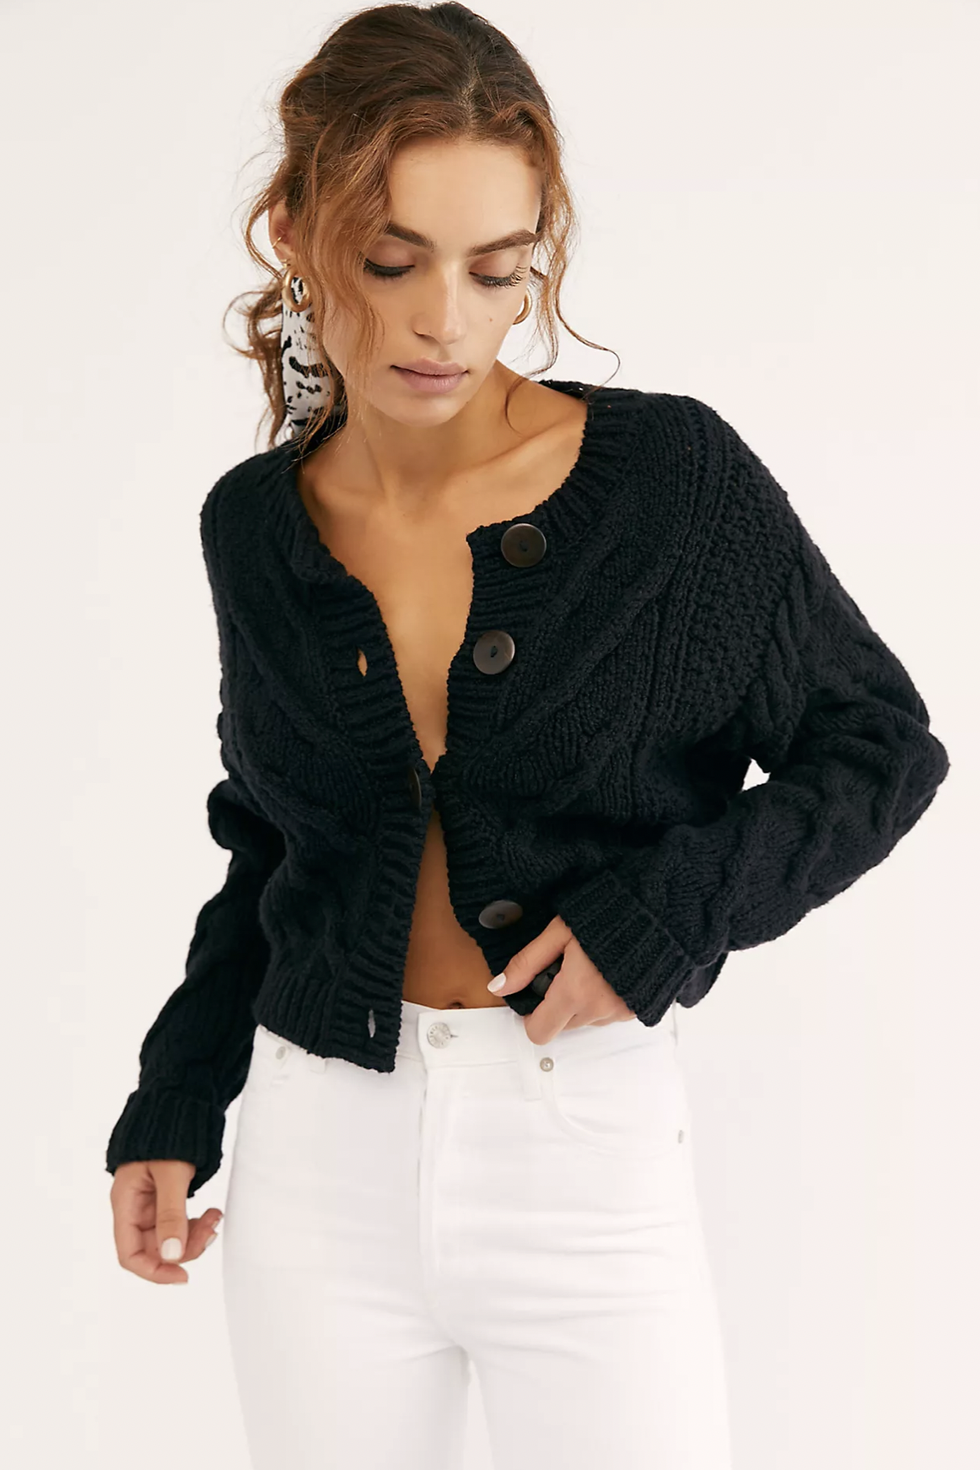 Free People Cozy Knit Pullover - The Fancy Things